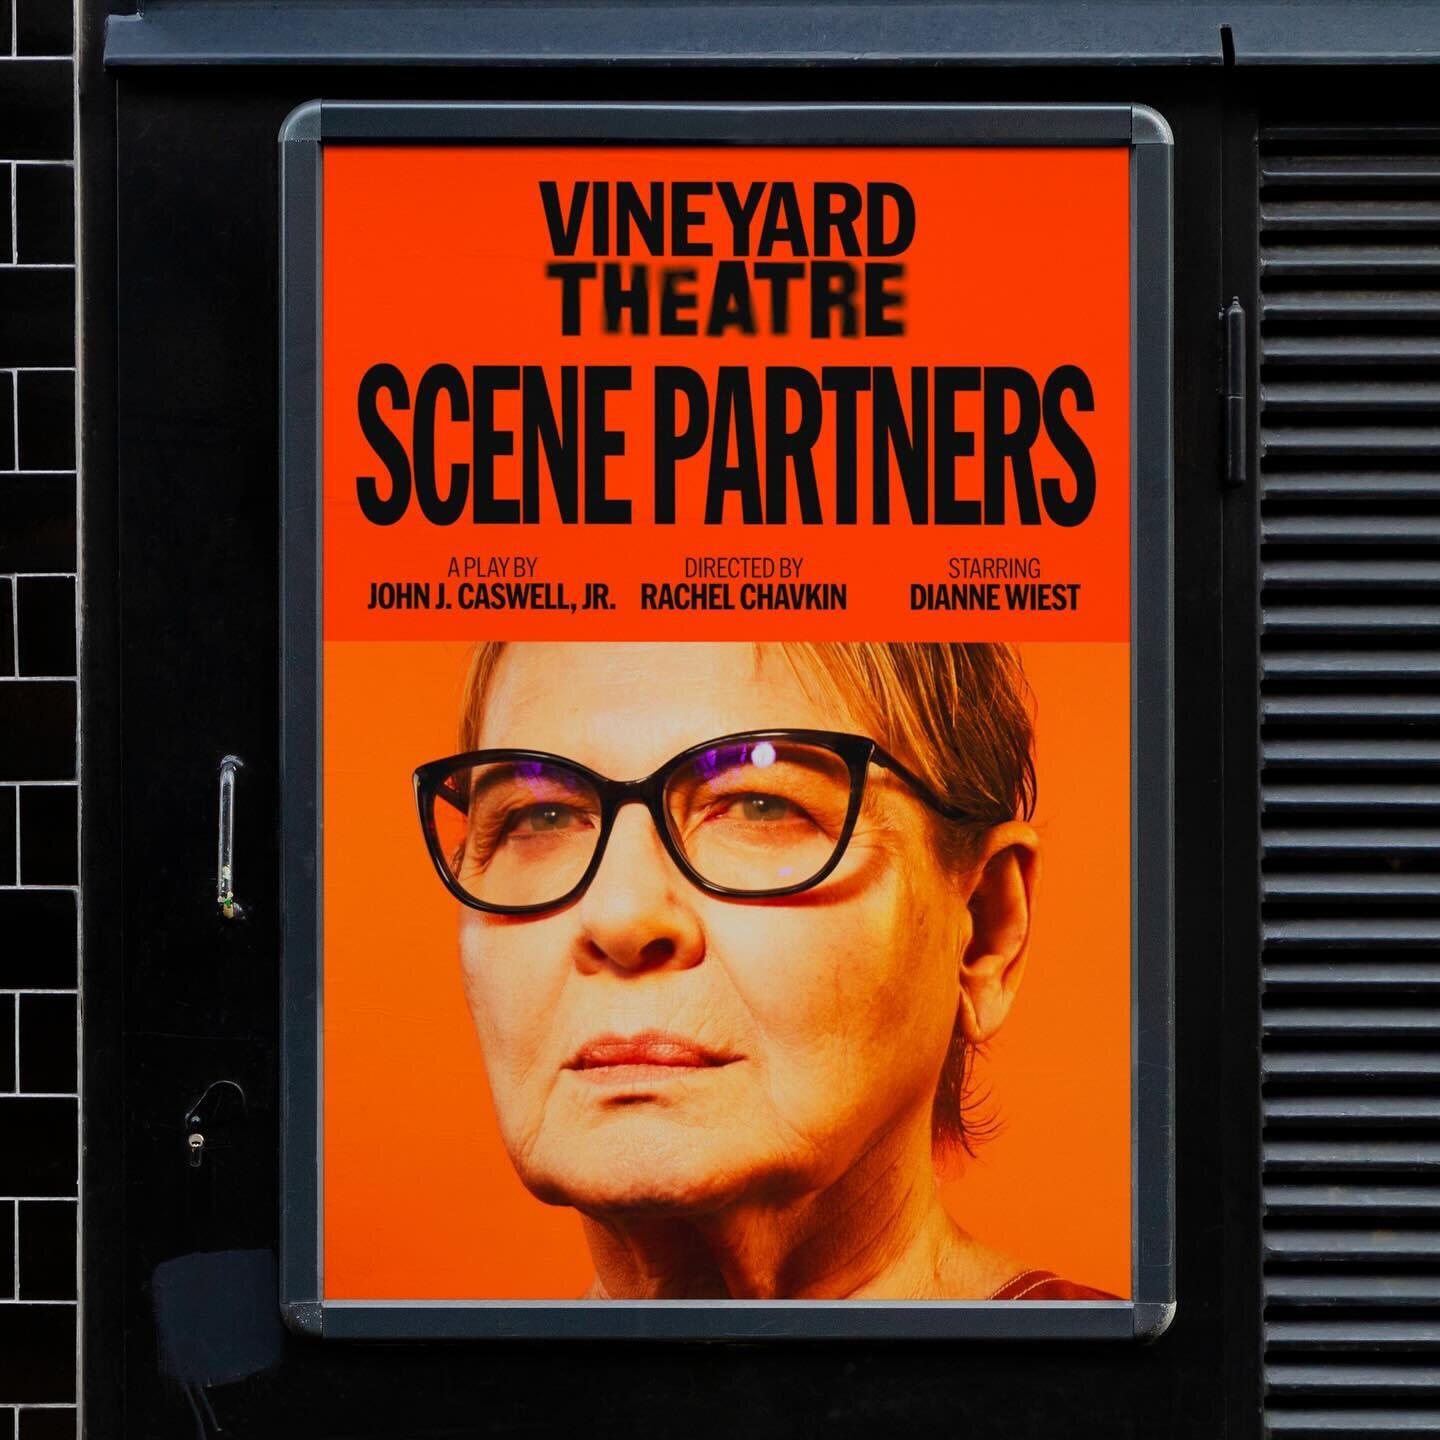 The Vineyard Theatre is an off Broadway theater in New York, dedicated to developing and producing new plays and musicals that push the boundaries of what theatre can be. @nbstudio_london recently redesigned their visual identity, which celebrates Ne